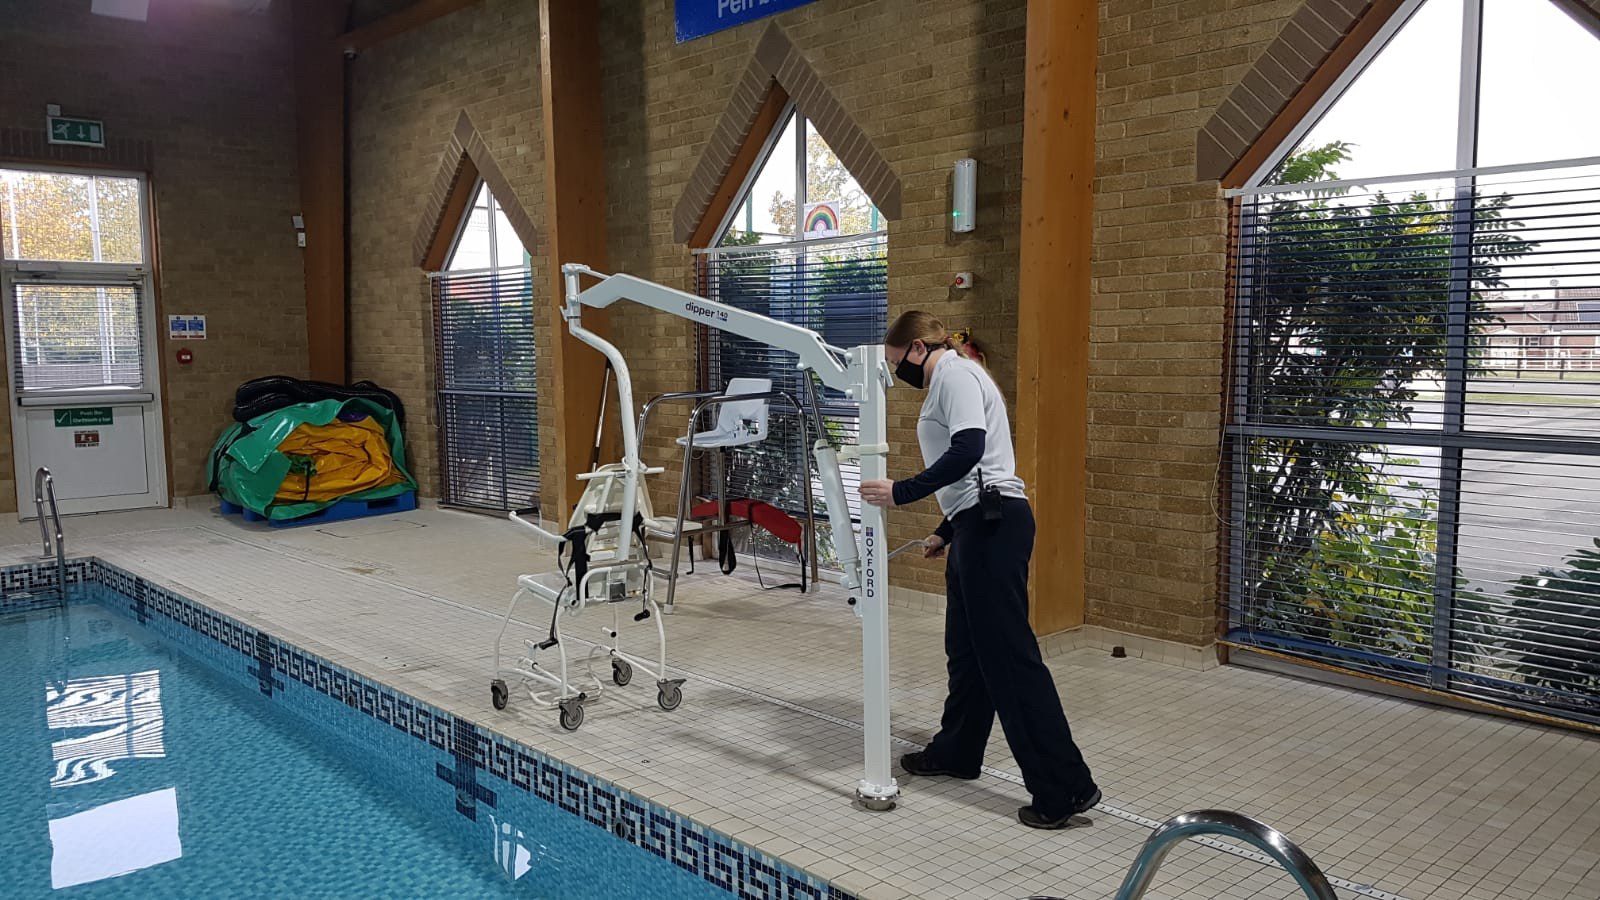 New hoists installed at Waterworld and Chirk sites